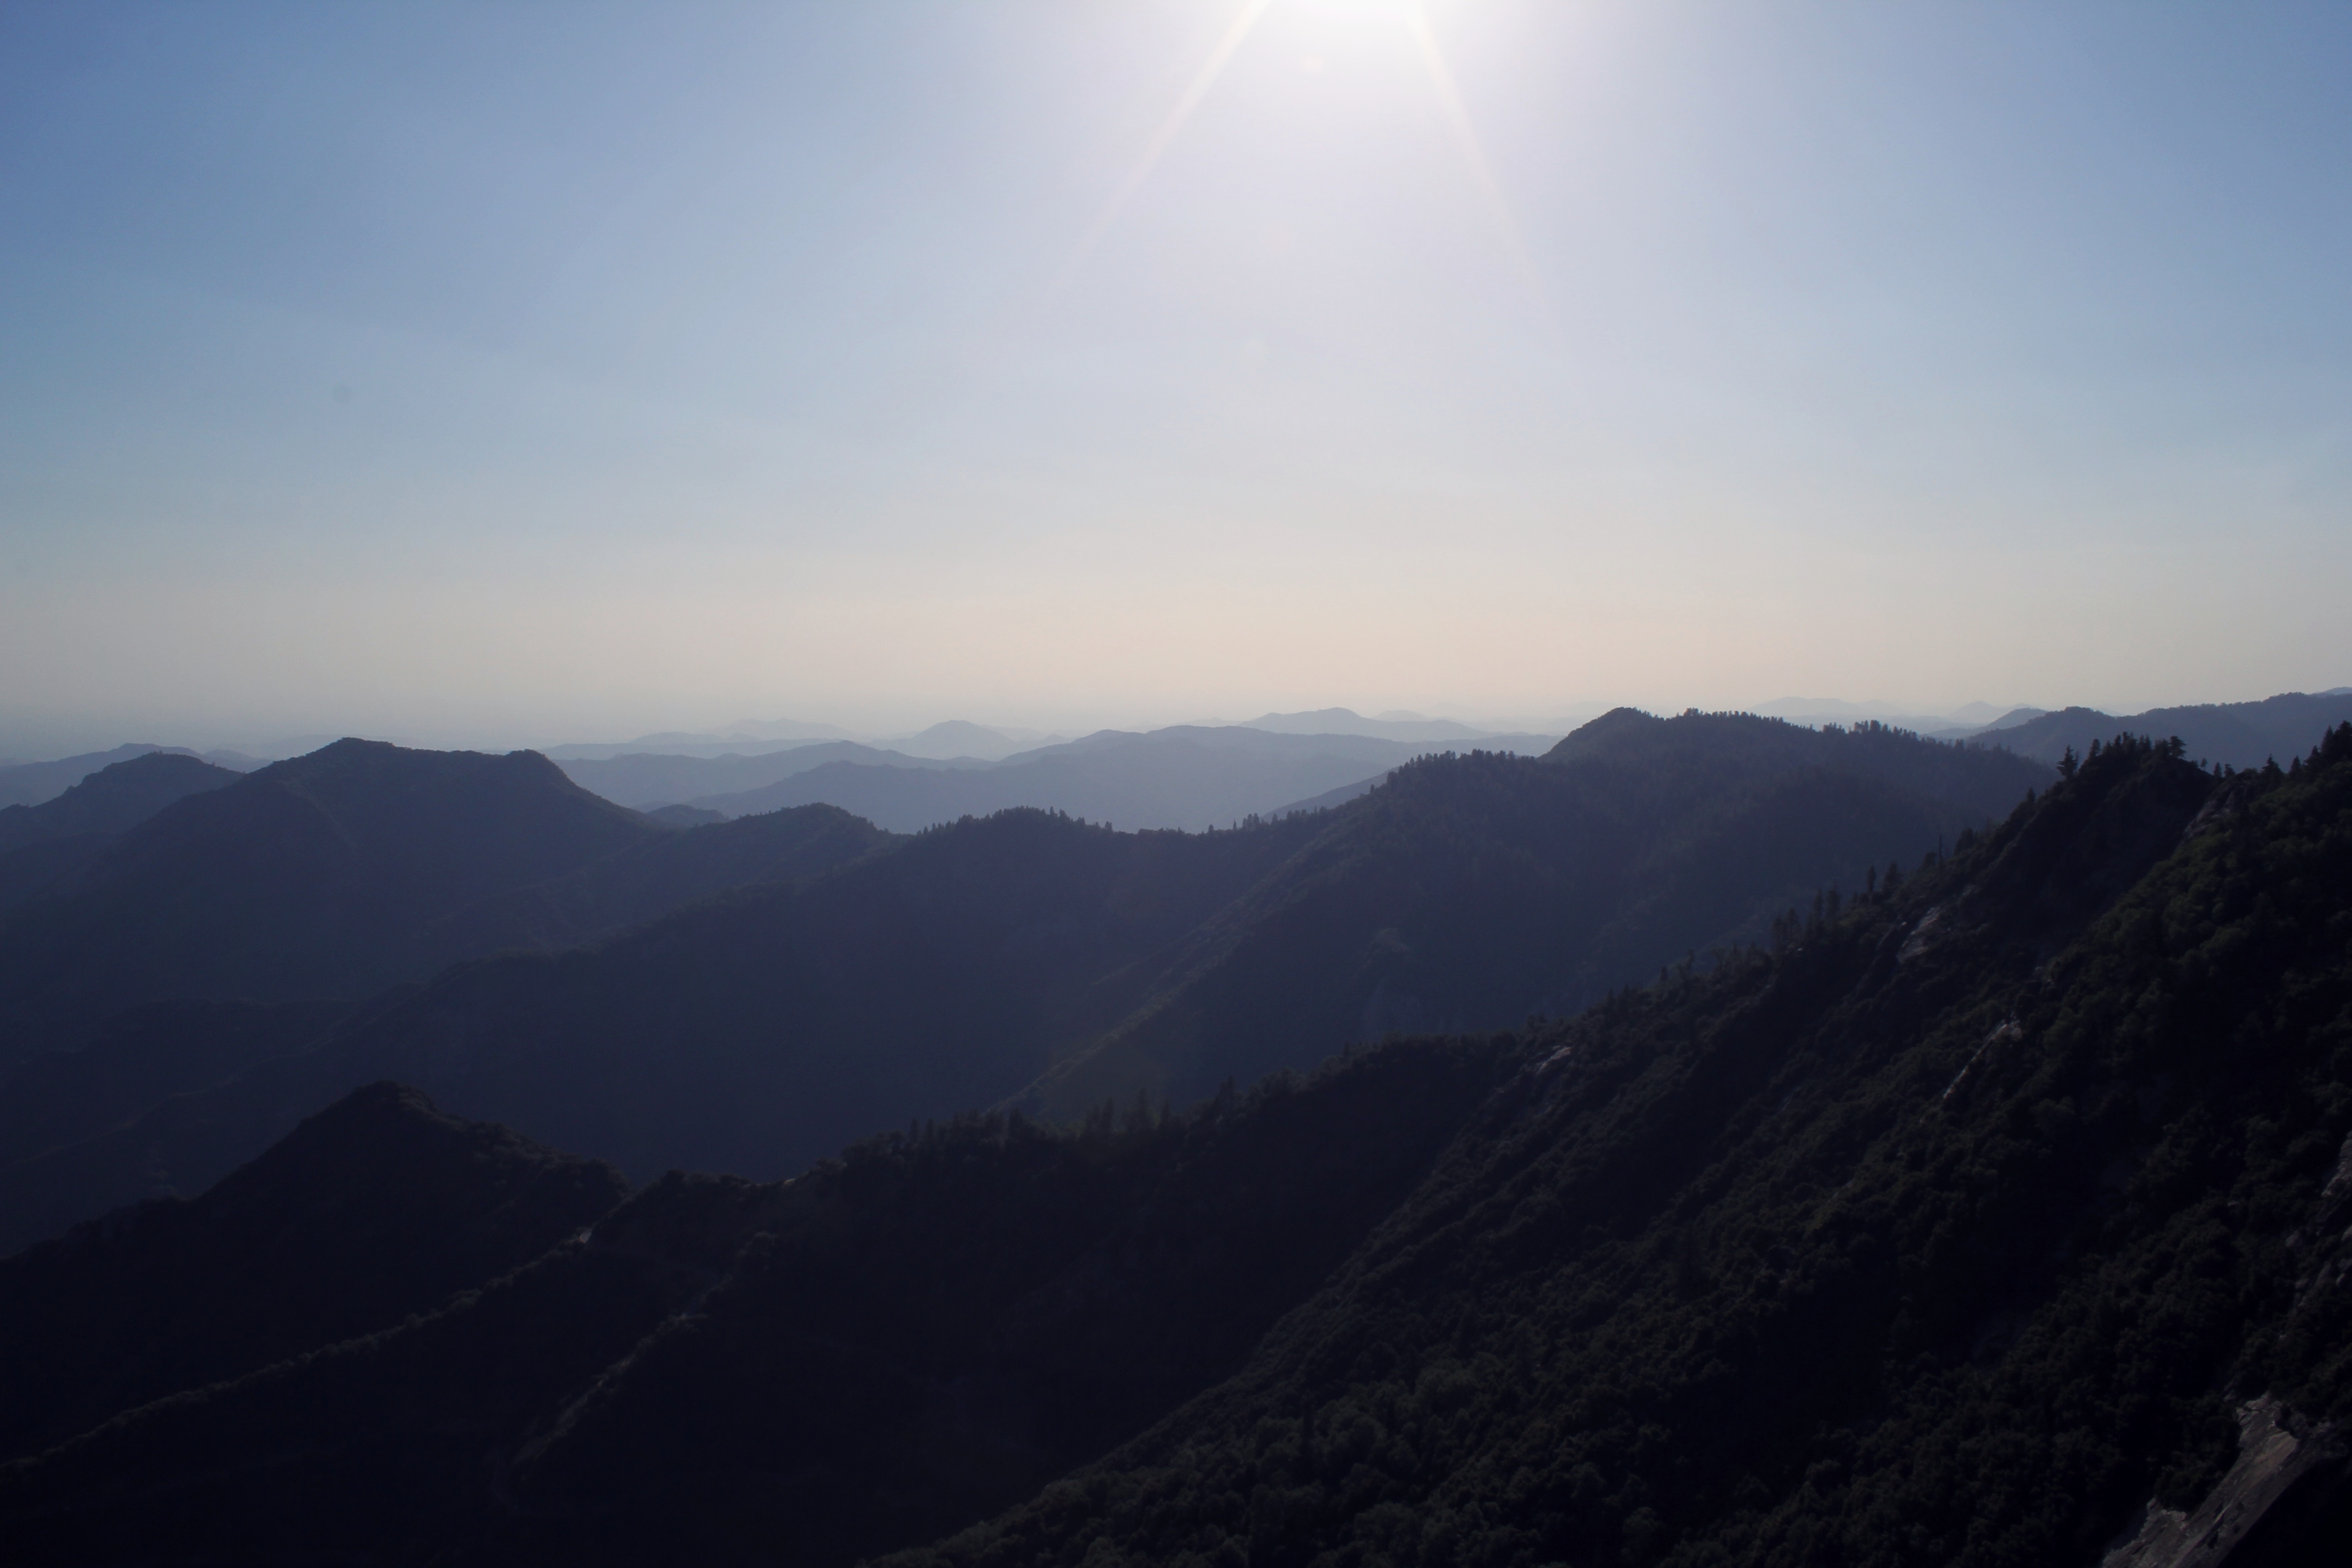 View from Moro Rock, Sequoia National Park